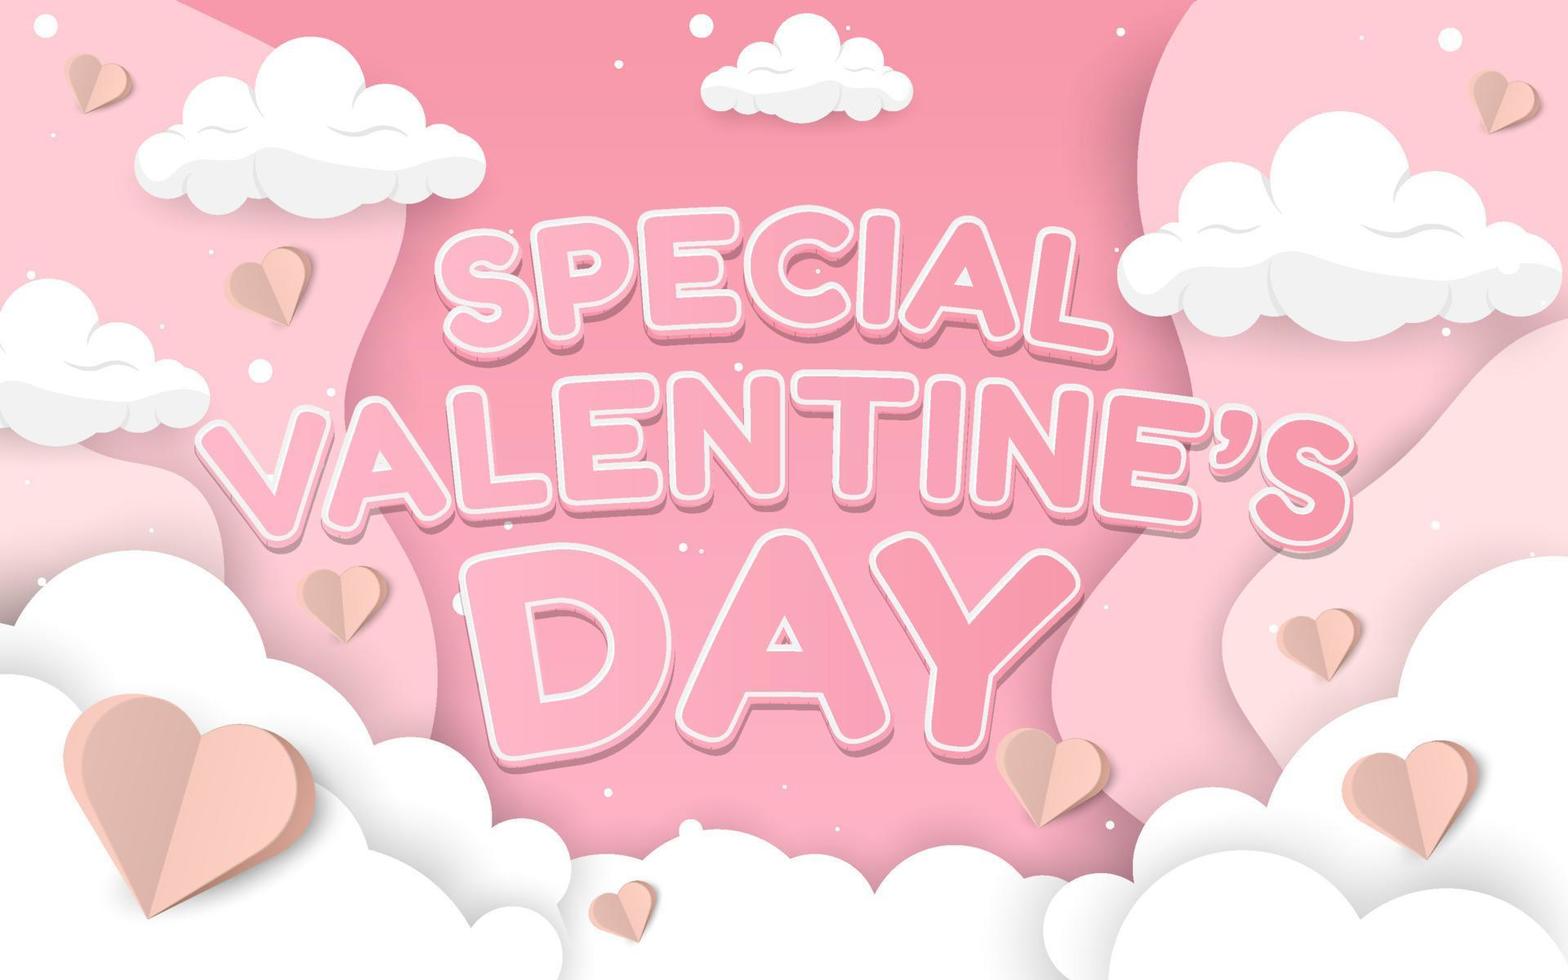 Special valentines day with paper style vector